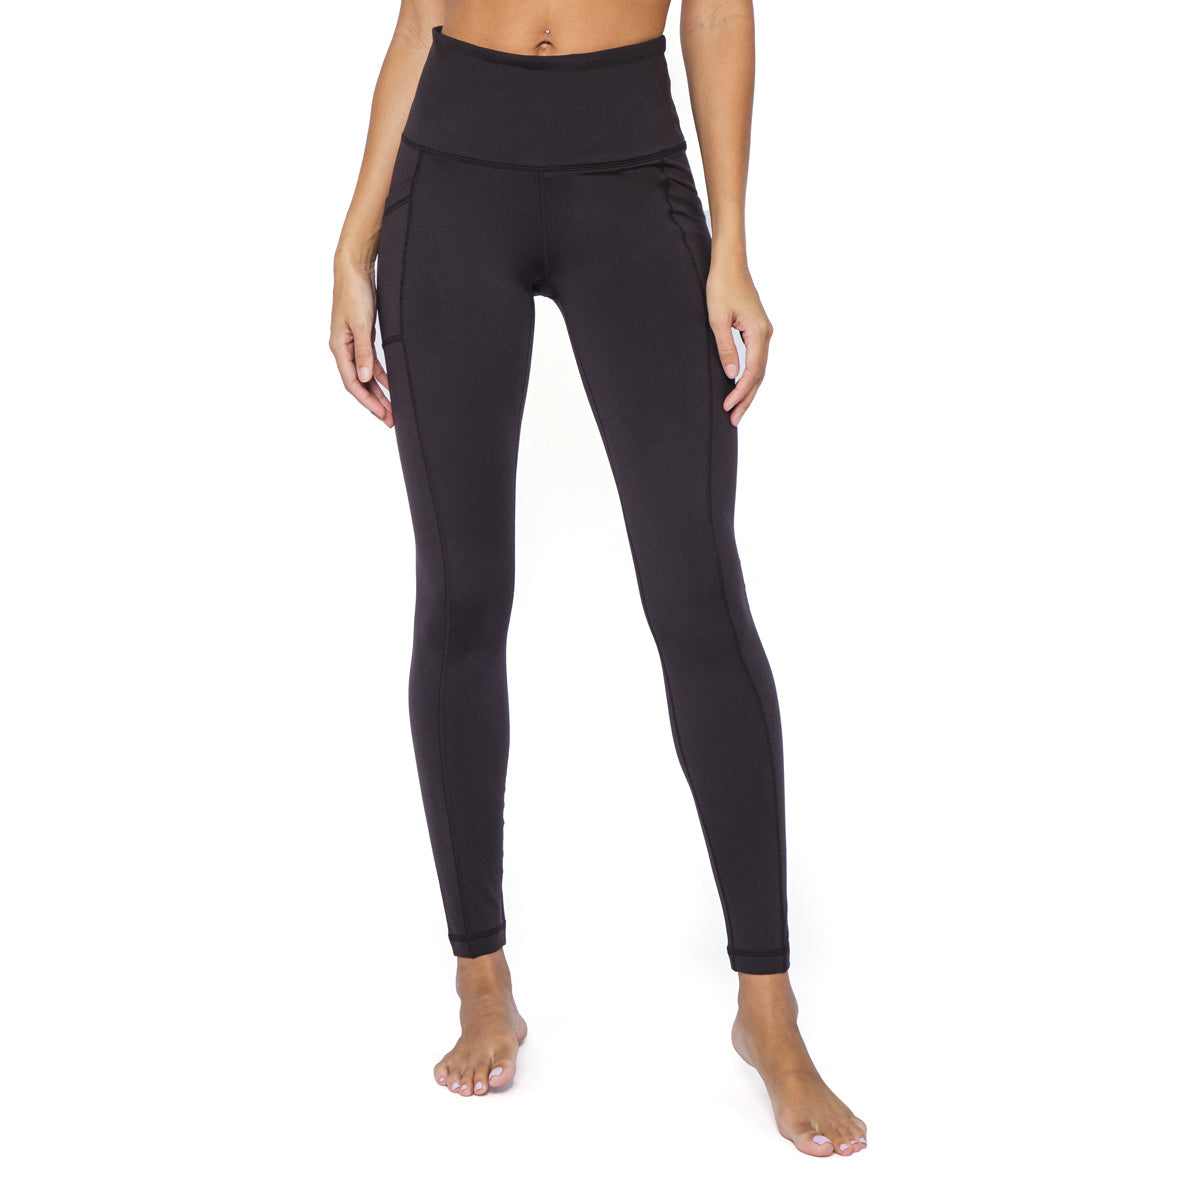 90 Degree By Reflex High Waist Fleece Lined Leggings with Side Pocket -  Yoga Pants - Black with Pocket - Large - Yahoo Shopping